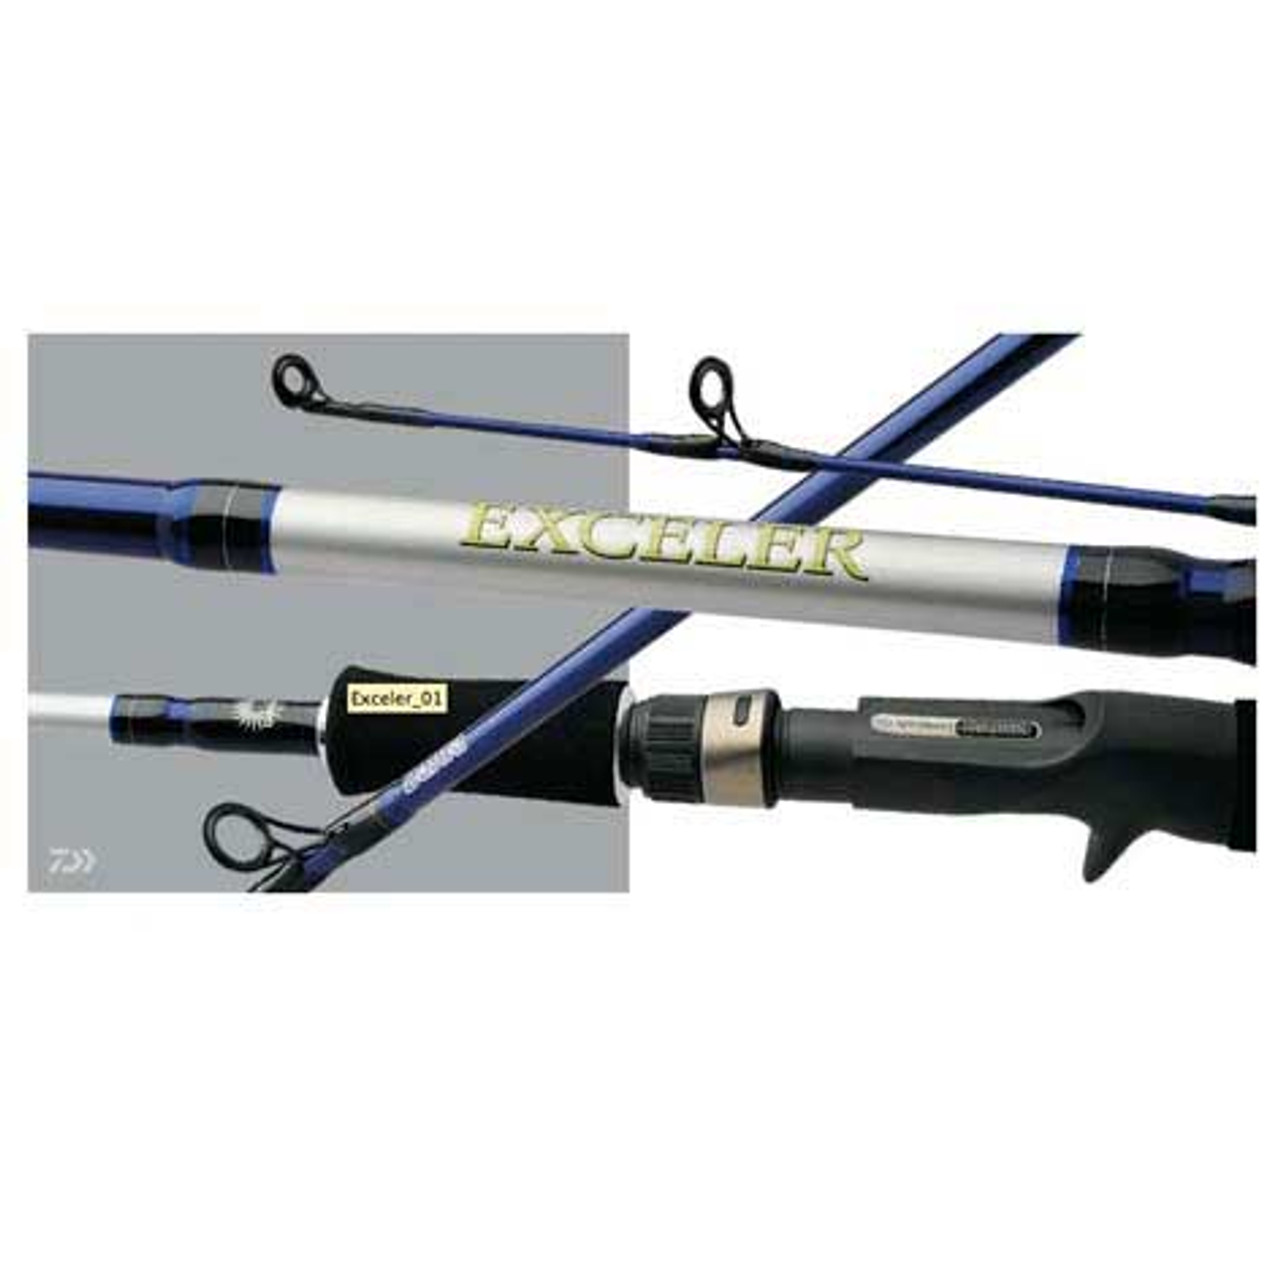 daiwa exceler products for sale